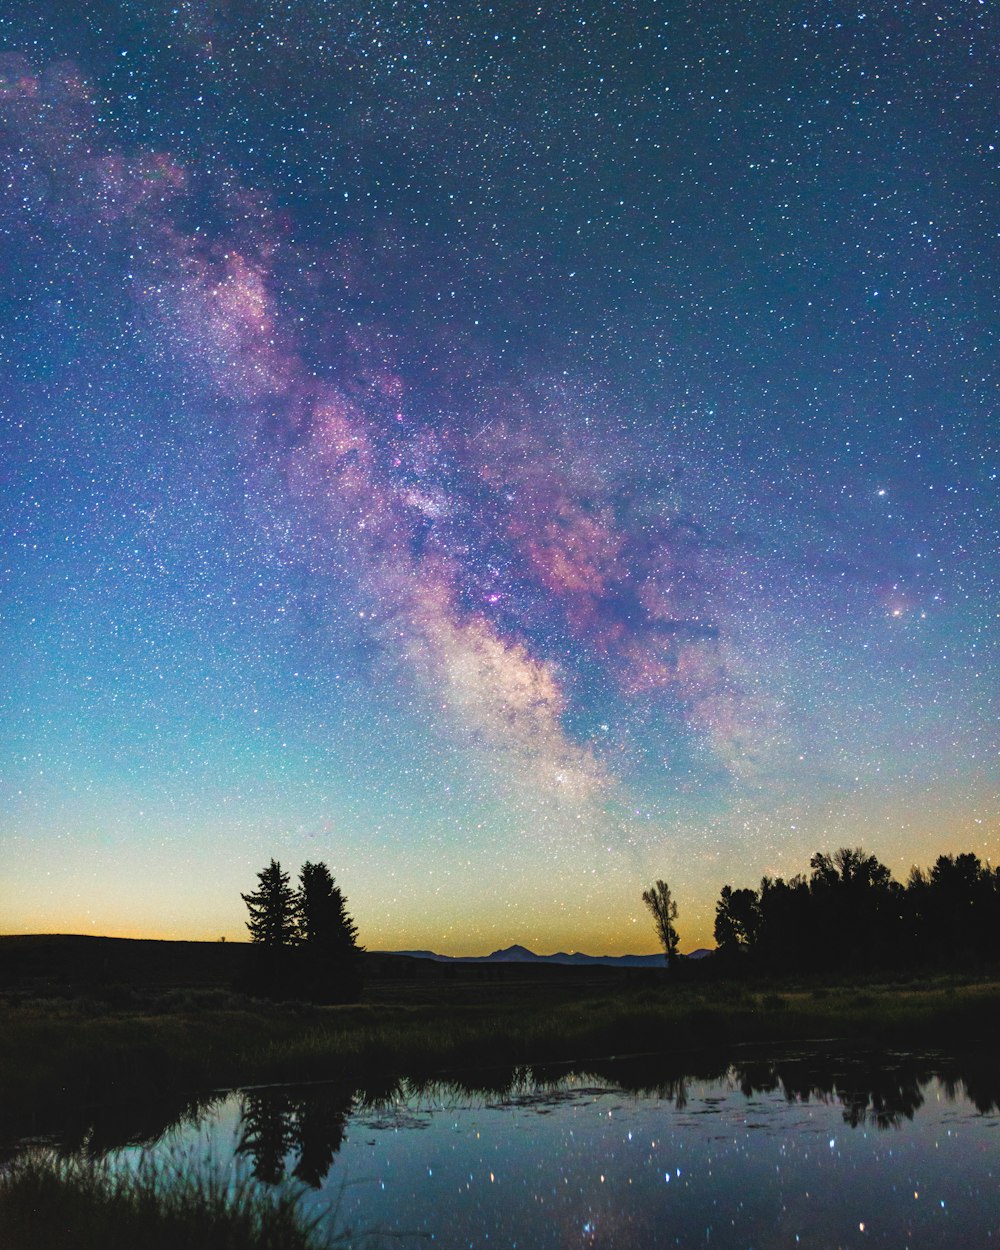 the night sky is filled with stars and the milky is reflected in the water